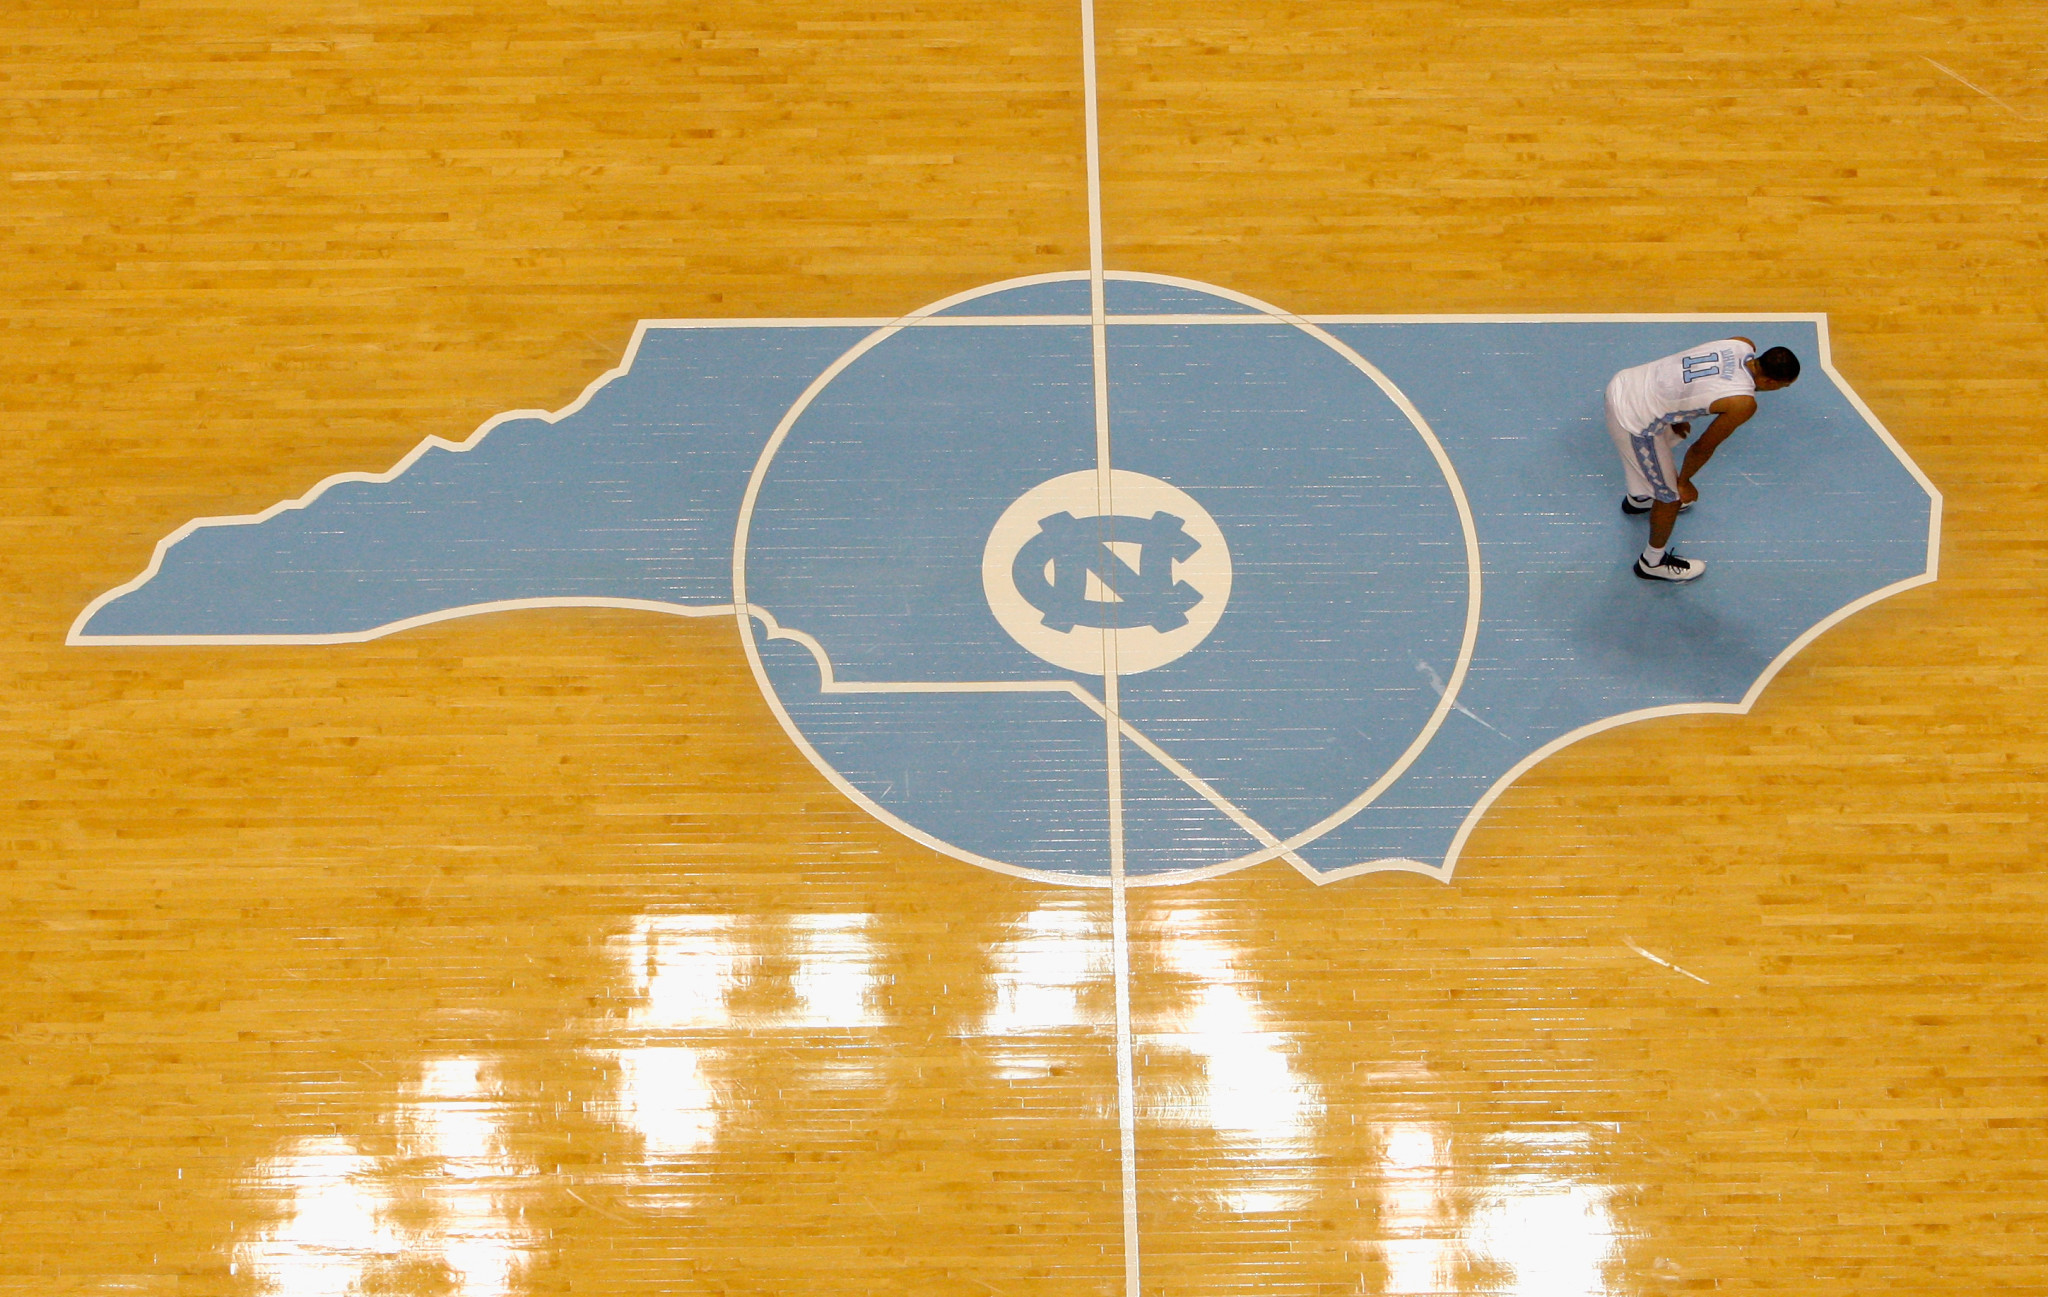 The University of North Carolina at Chapel Hill is one of three major universities in the Tringle area ©Getty Images